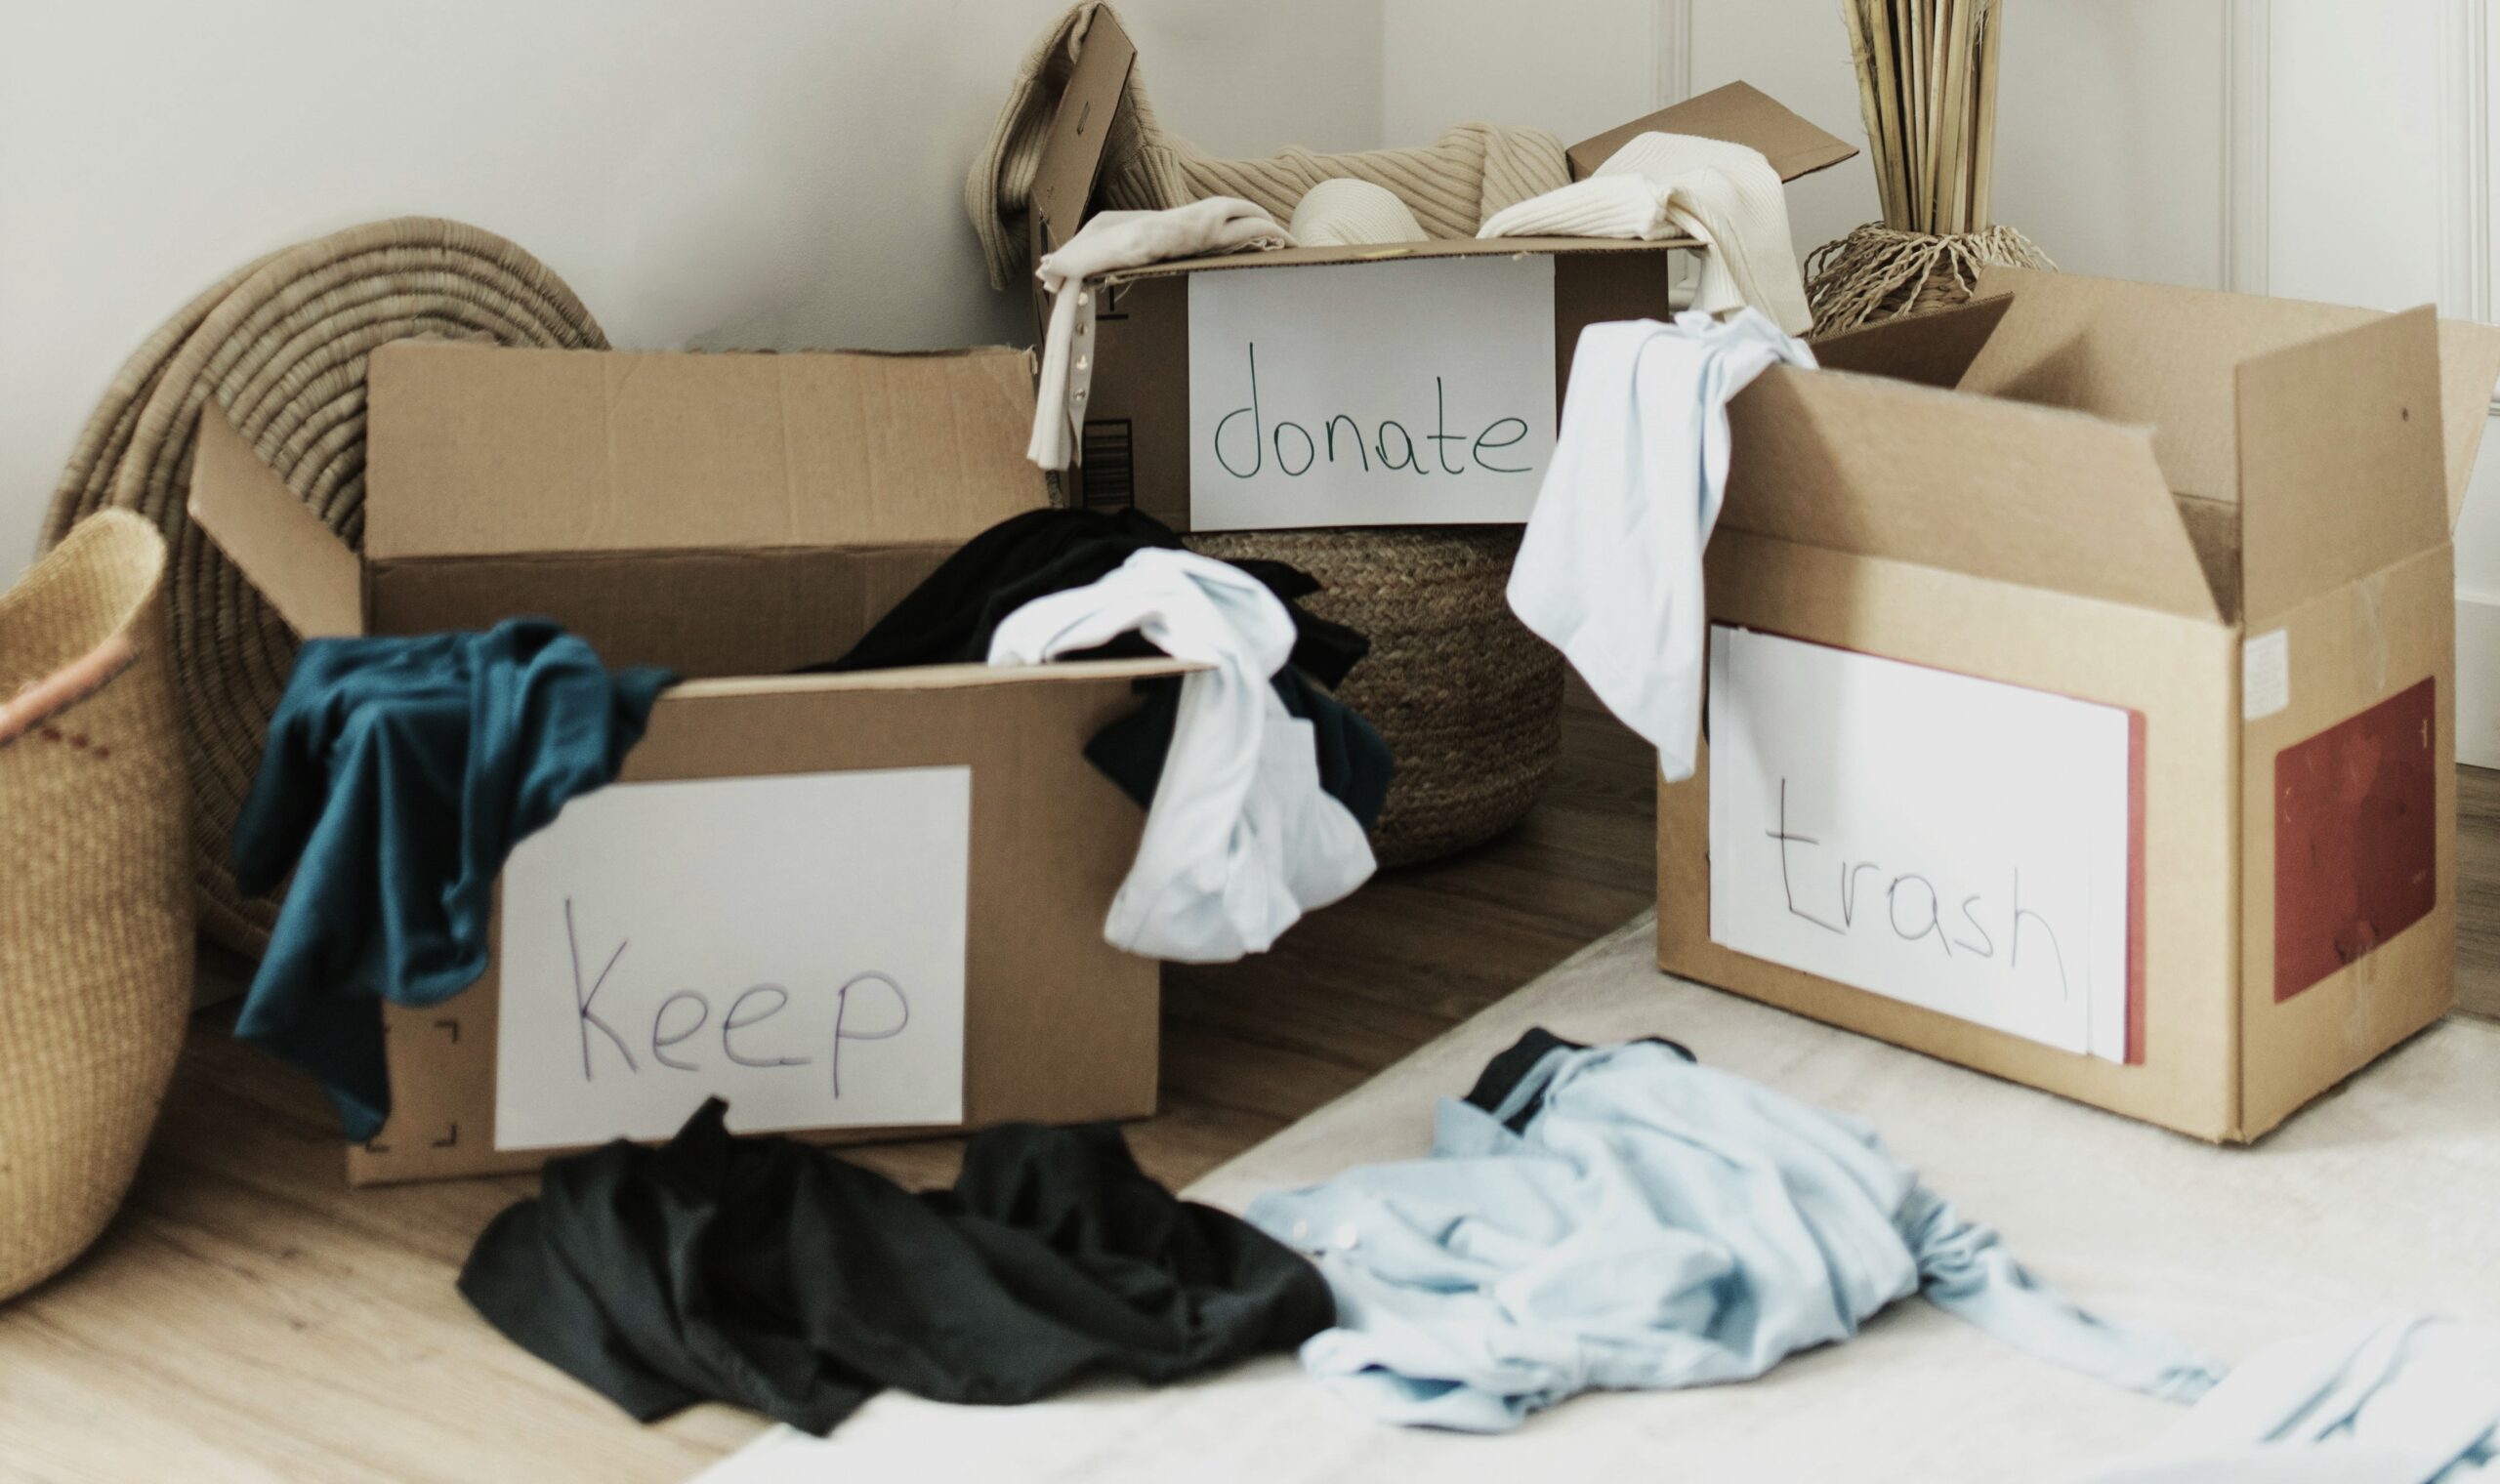 When clearing clutter, separate items into three categories.